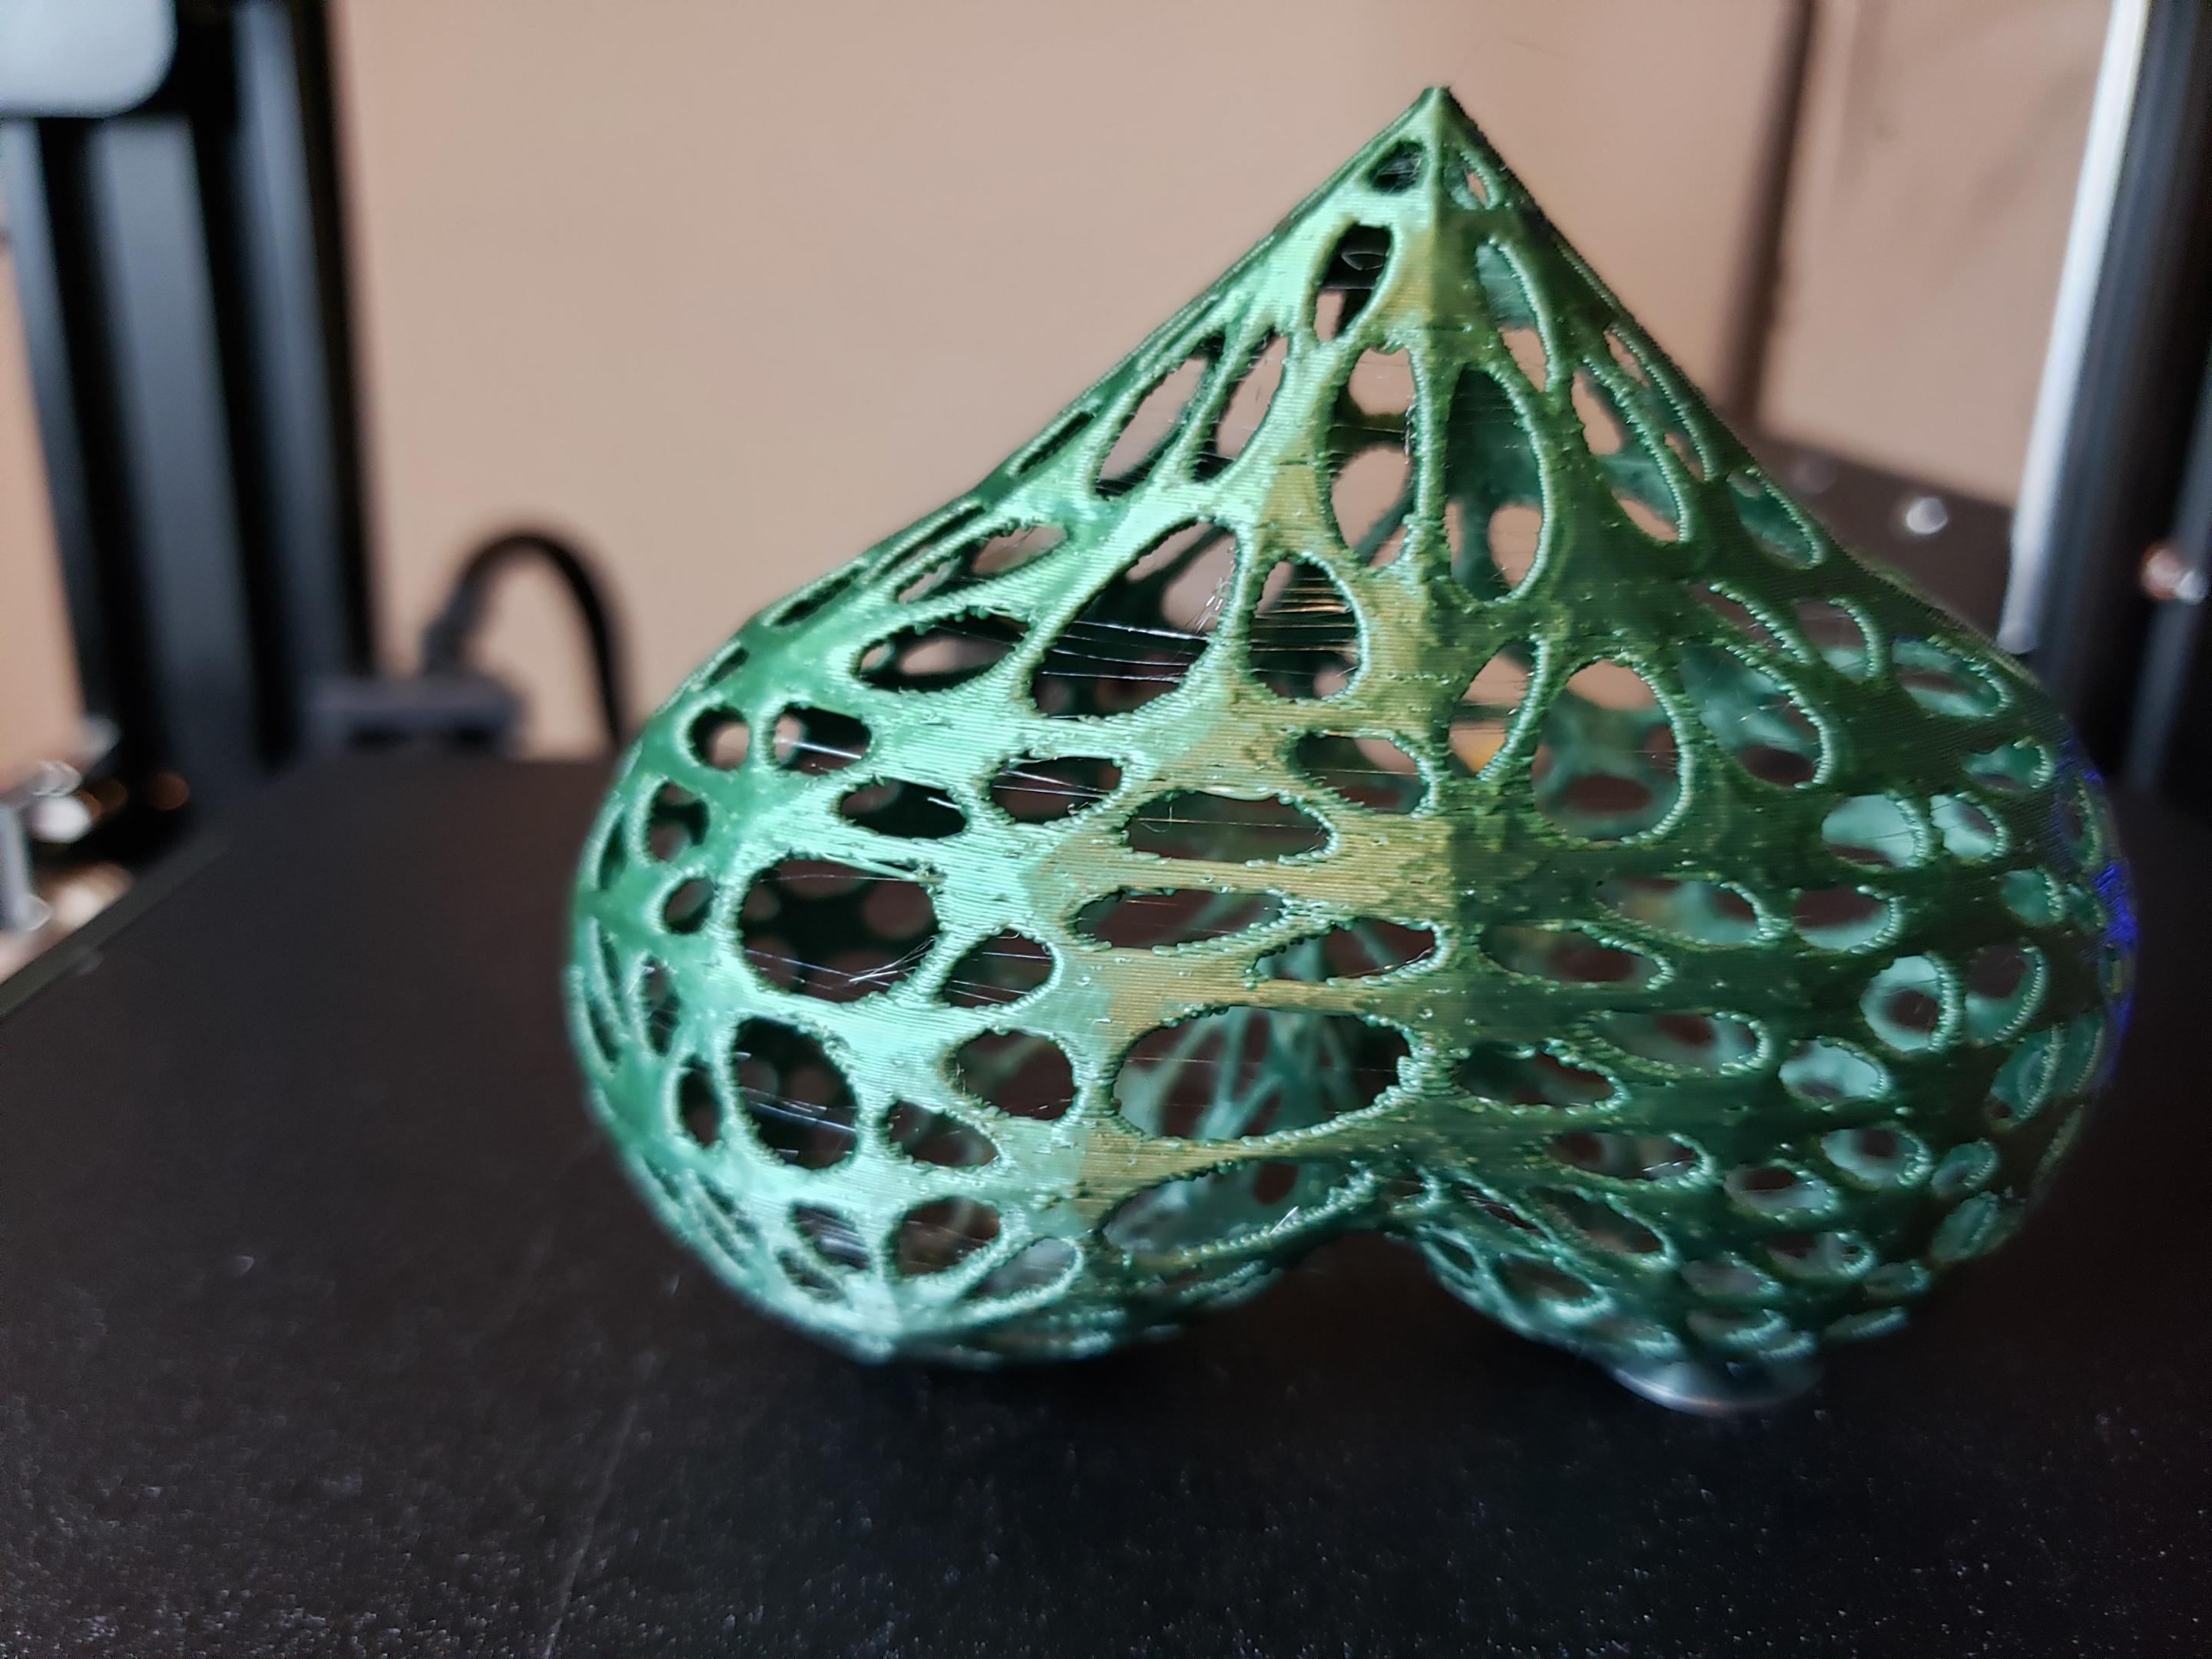 Another Stupid Heart - Retraction Enabled made a cleaner print. - 3d model